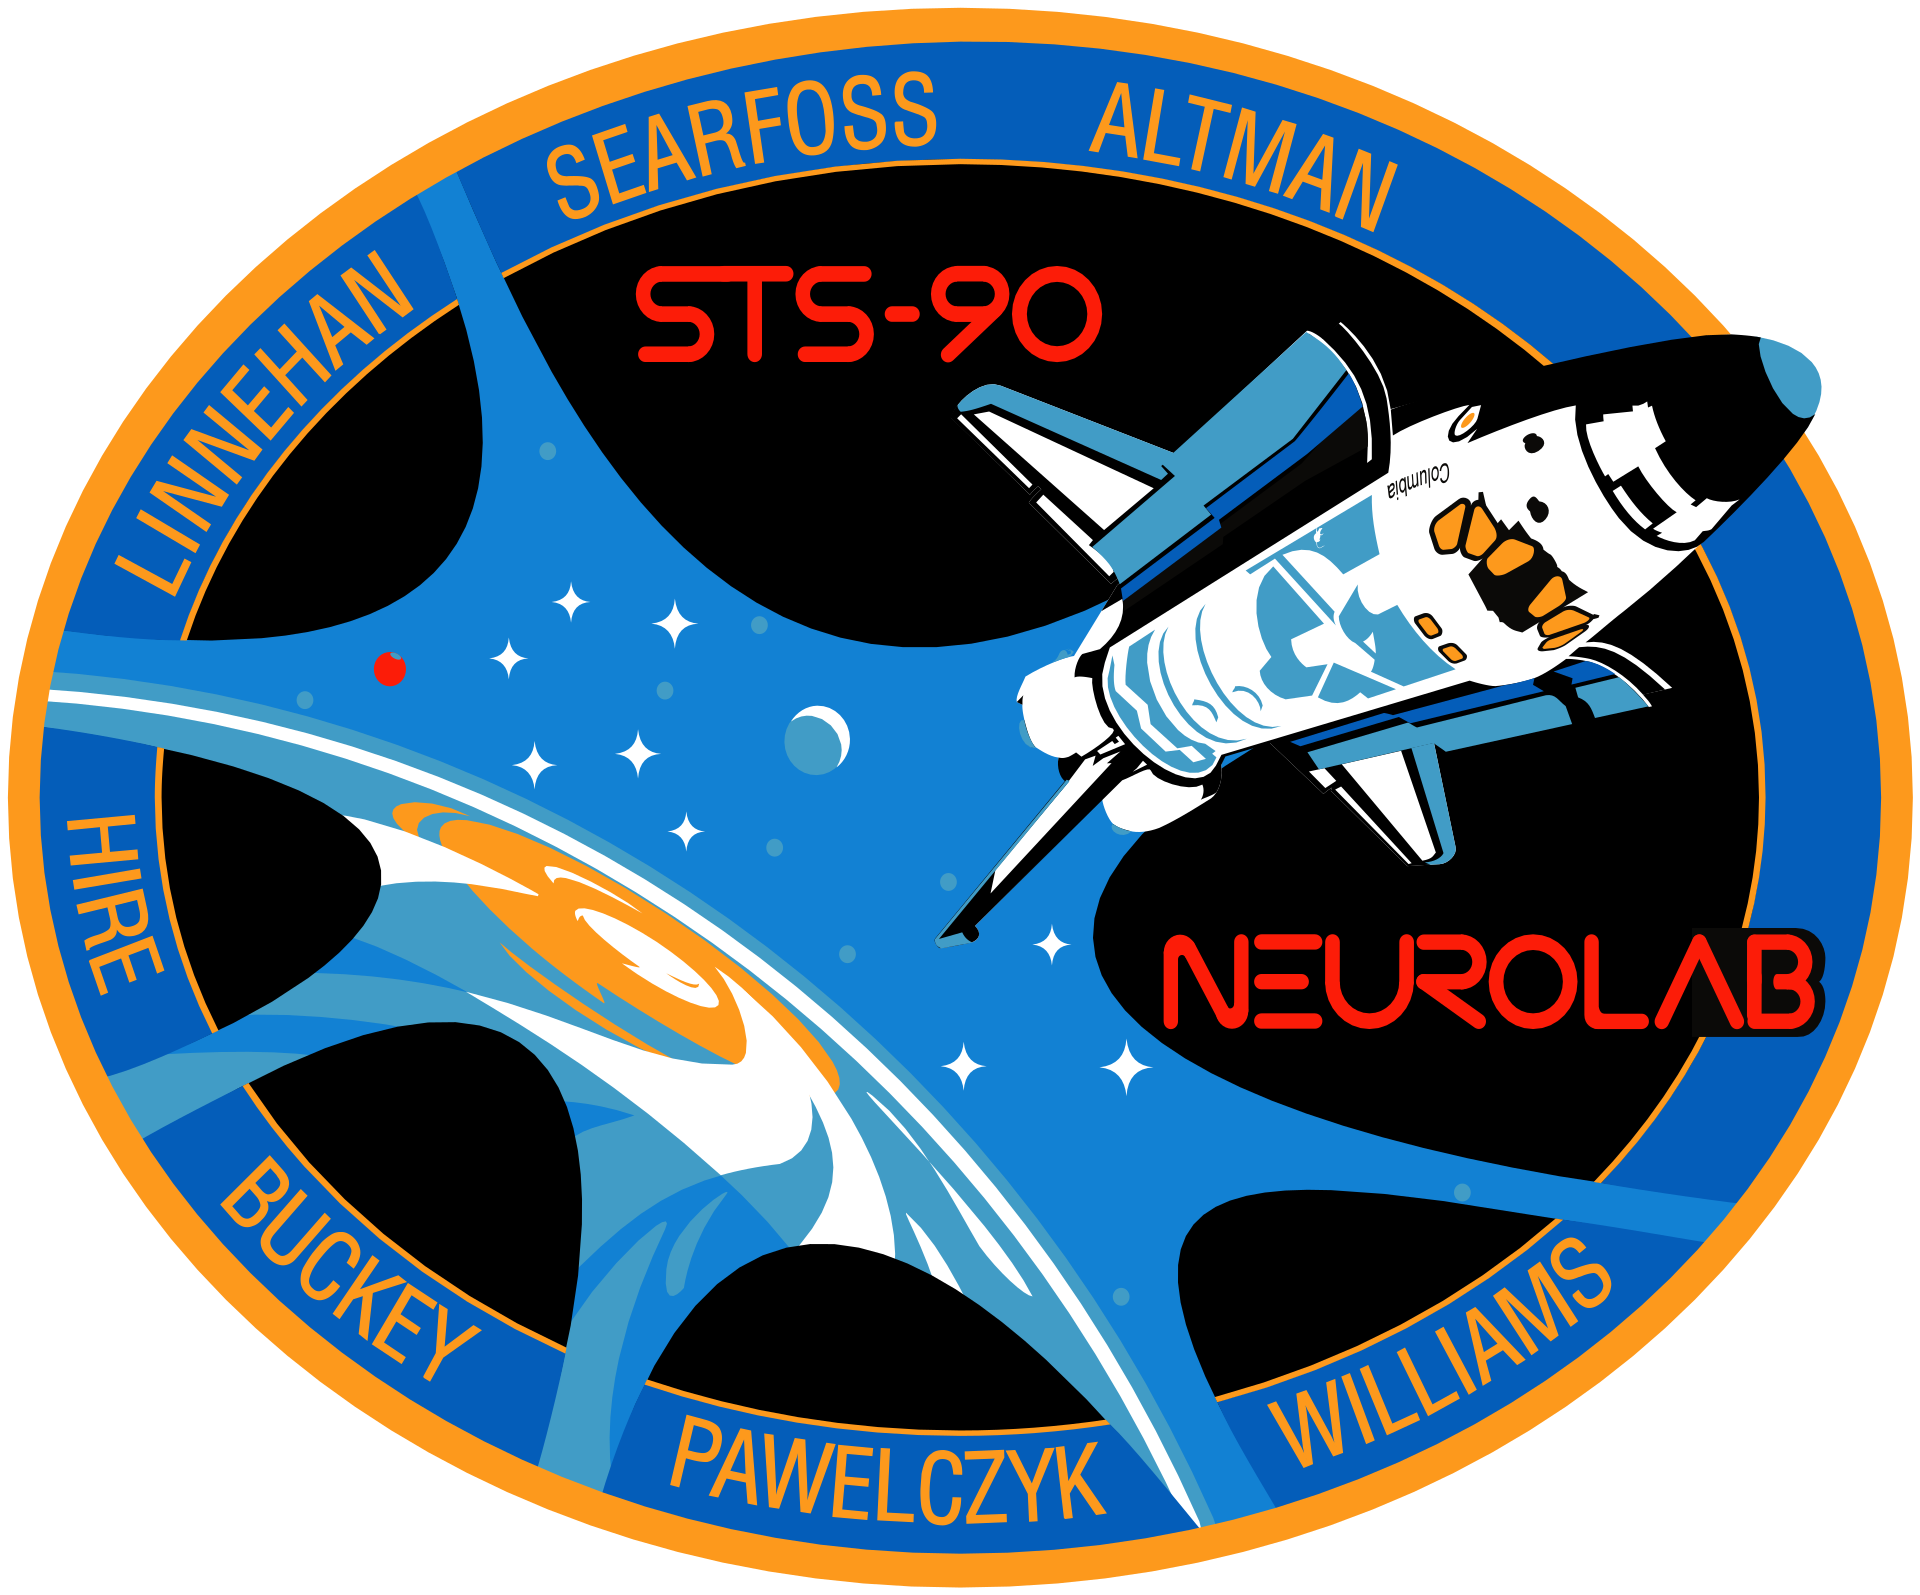 Mission patch for STS-90